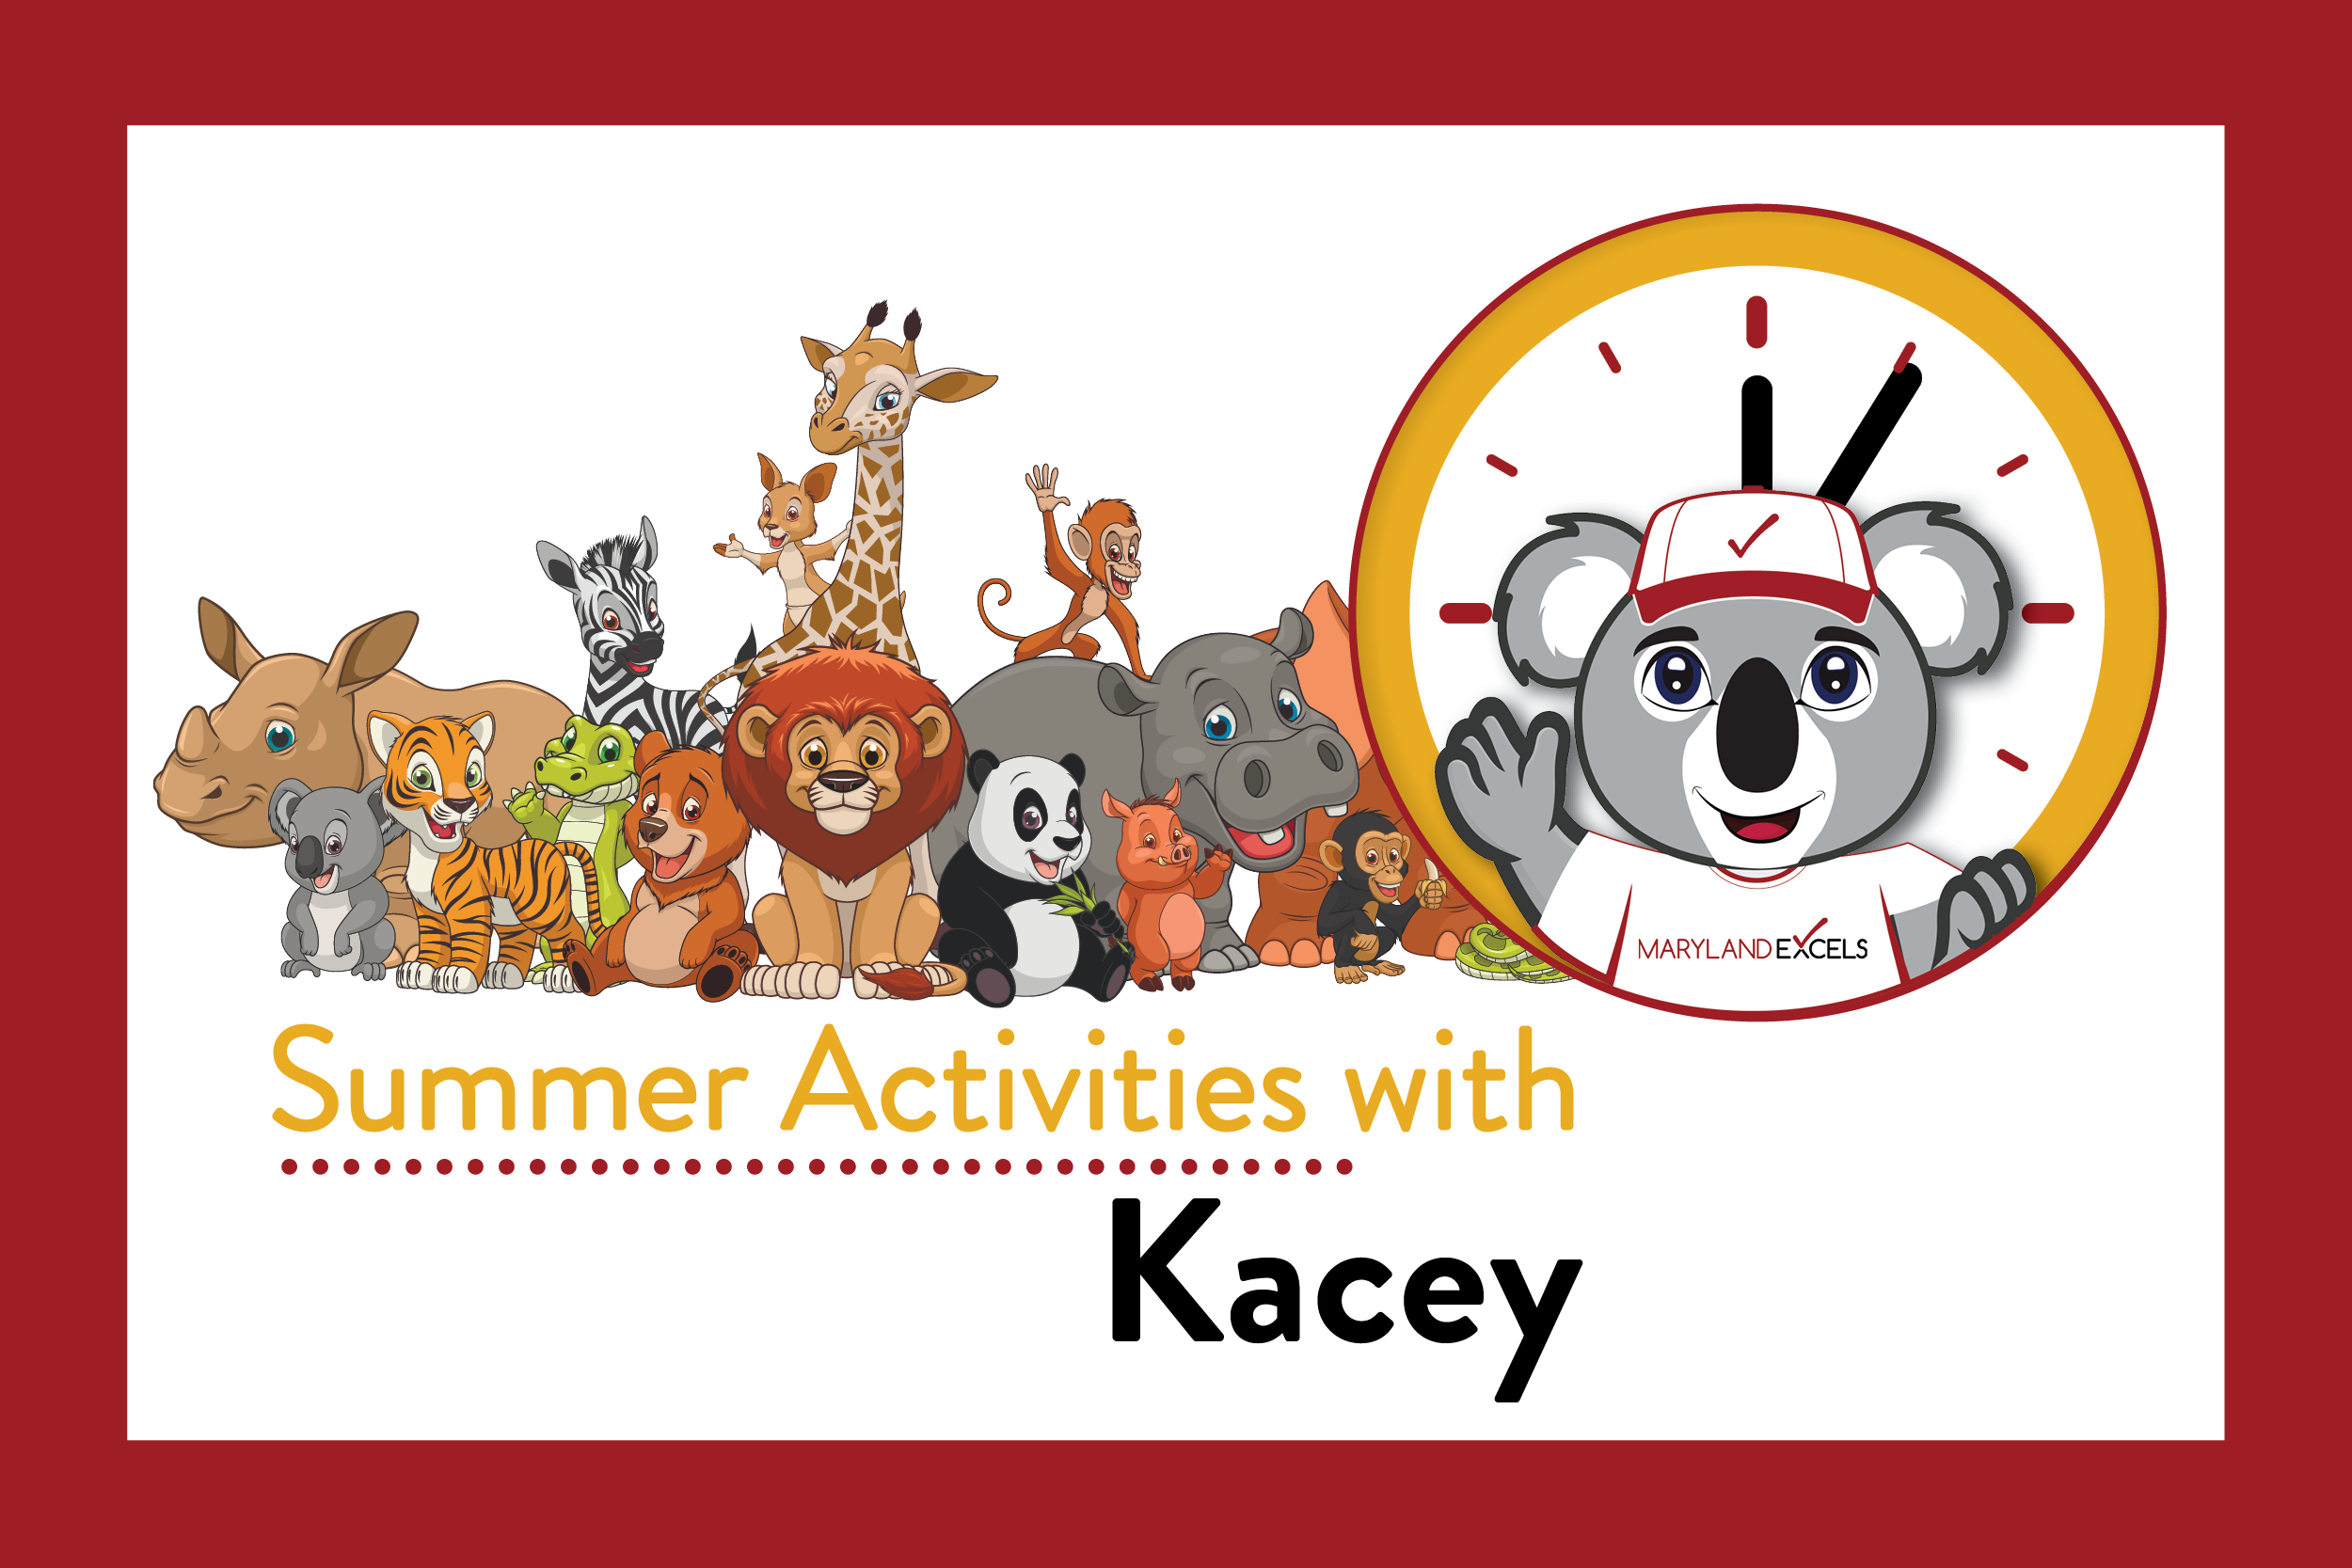 Summer activities with Kacey